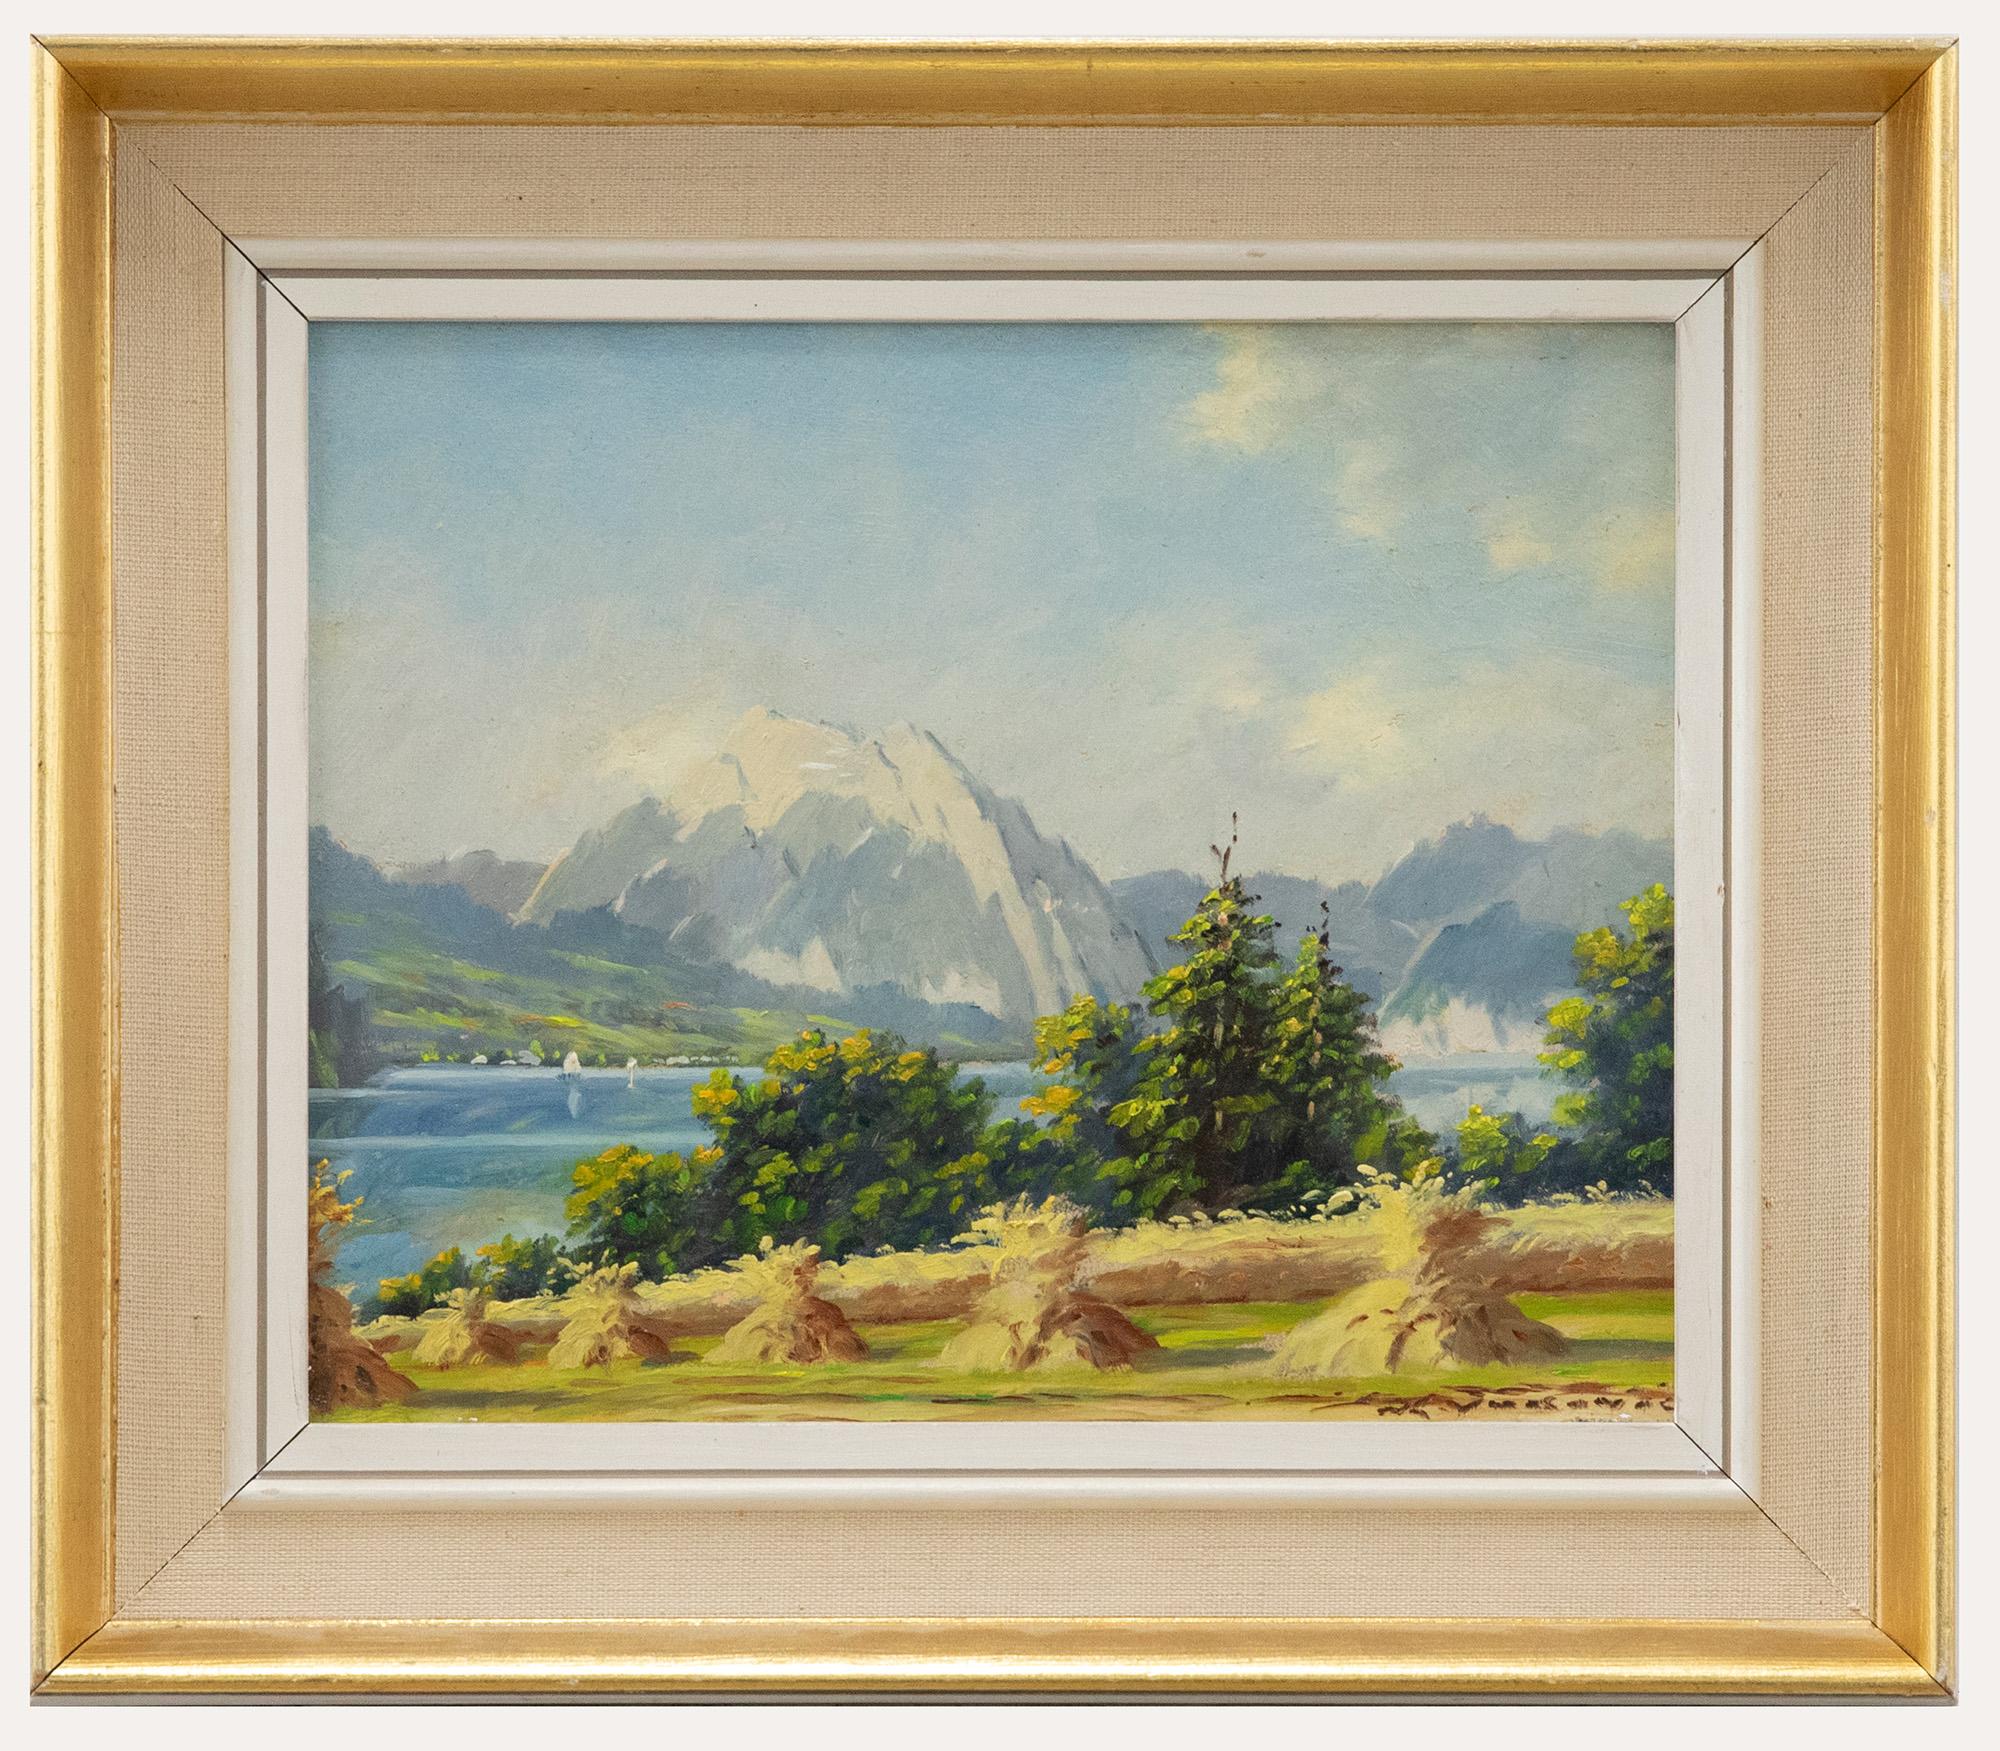 Unknown Landscape Painting - Karl Vukovic (1897-1973) - Framed Mid 20th Century Oil, Traunsee